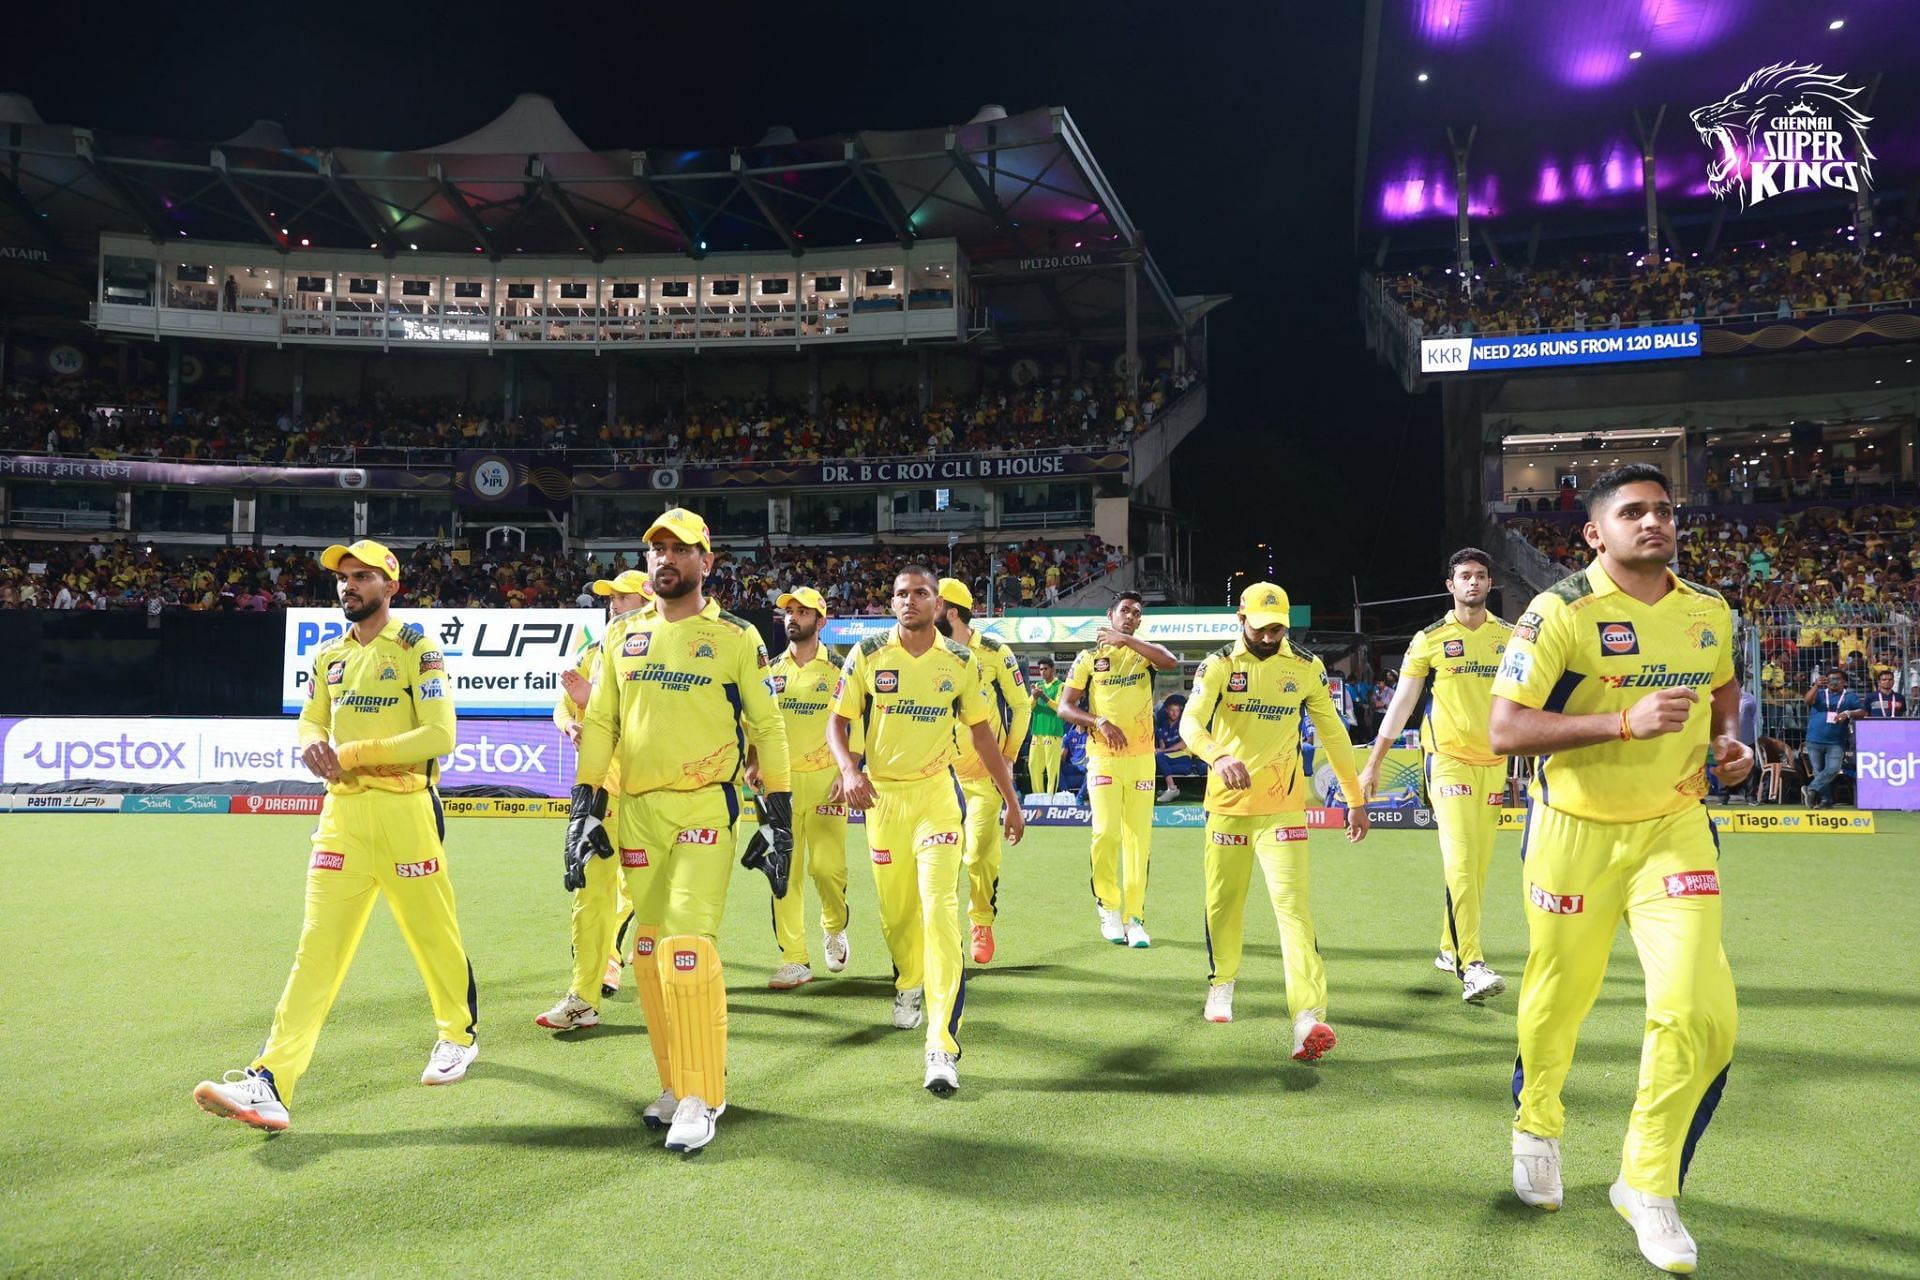 CSK are top of the IPL 2023 table with 5 wins from 7 games [Credits: CSK]